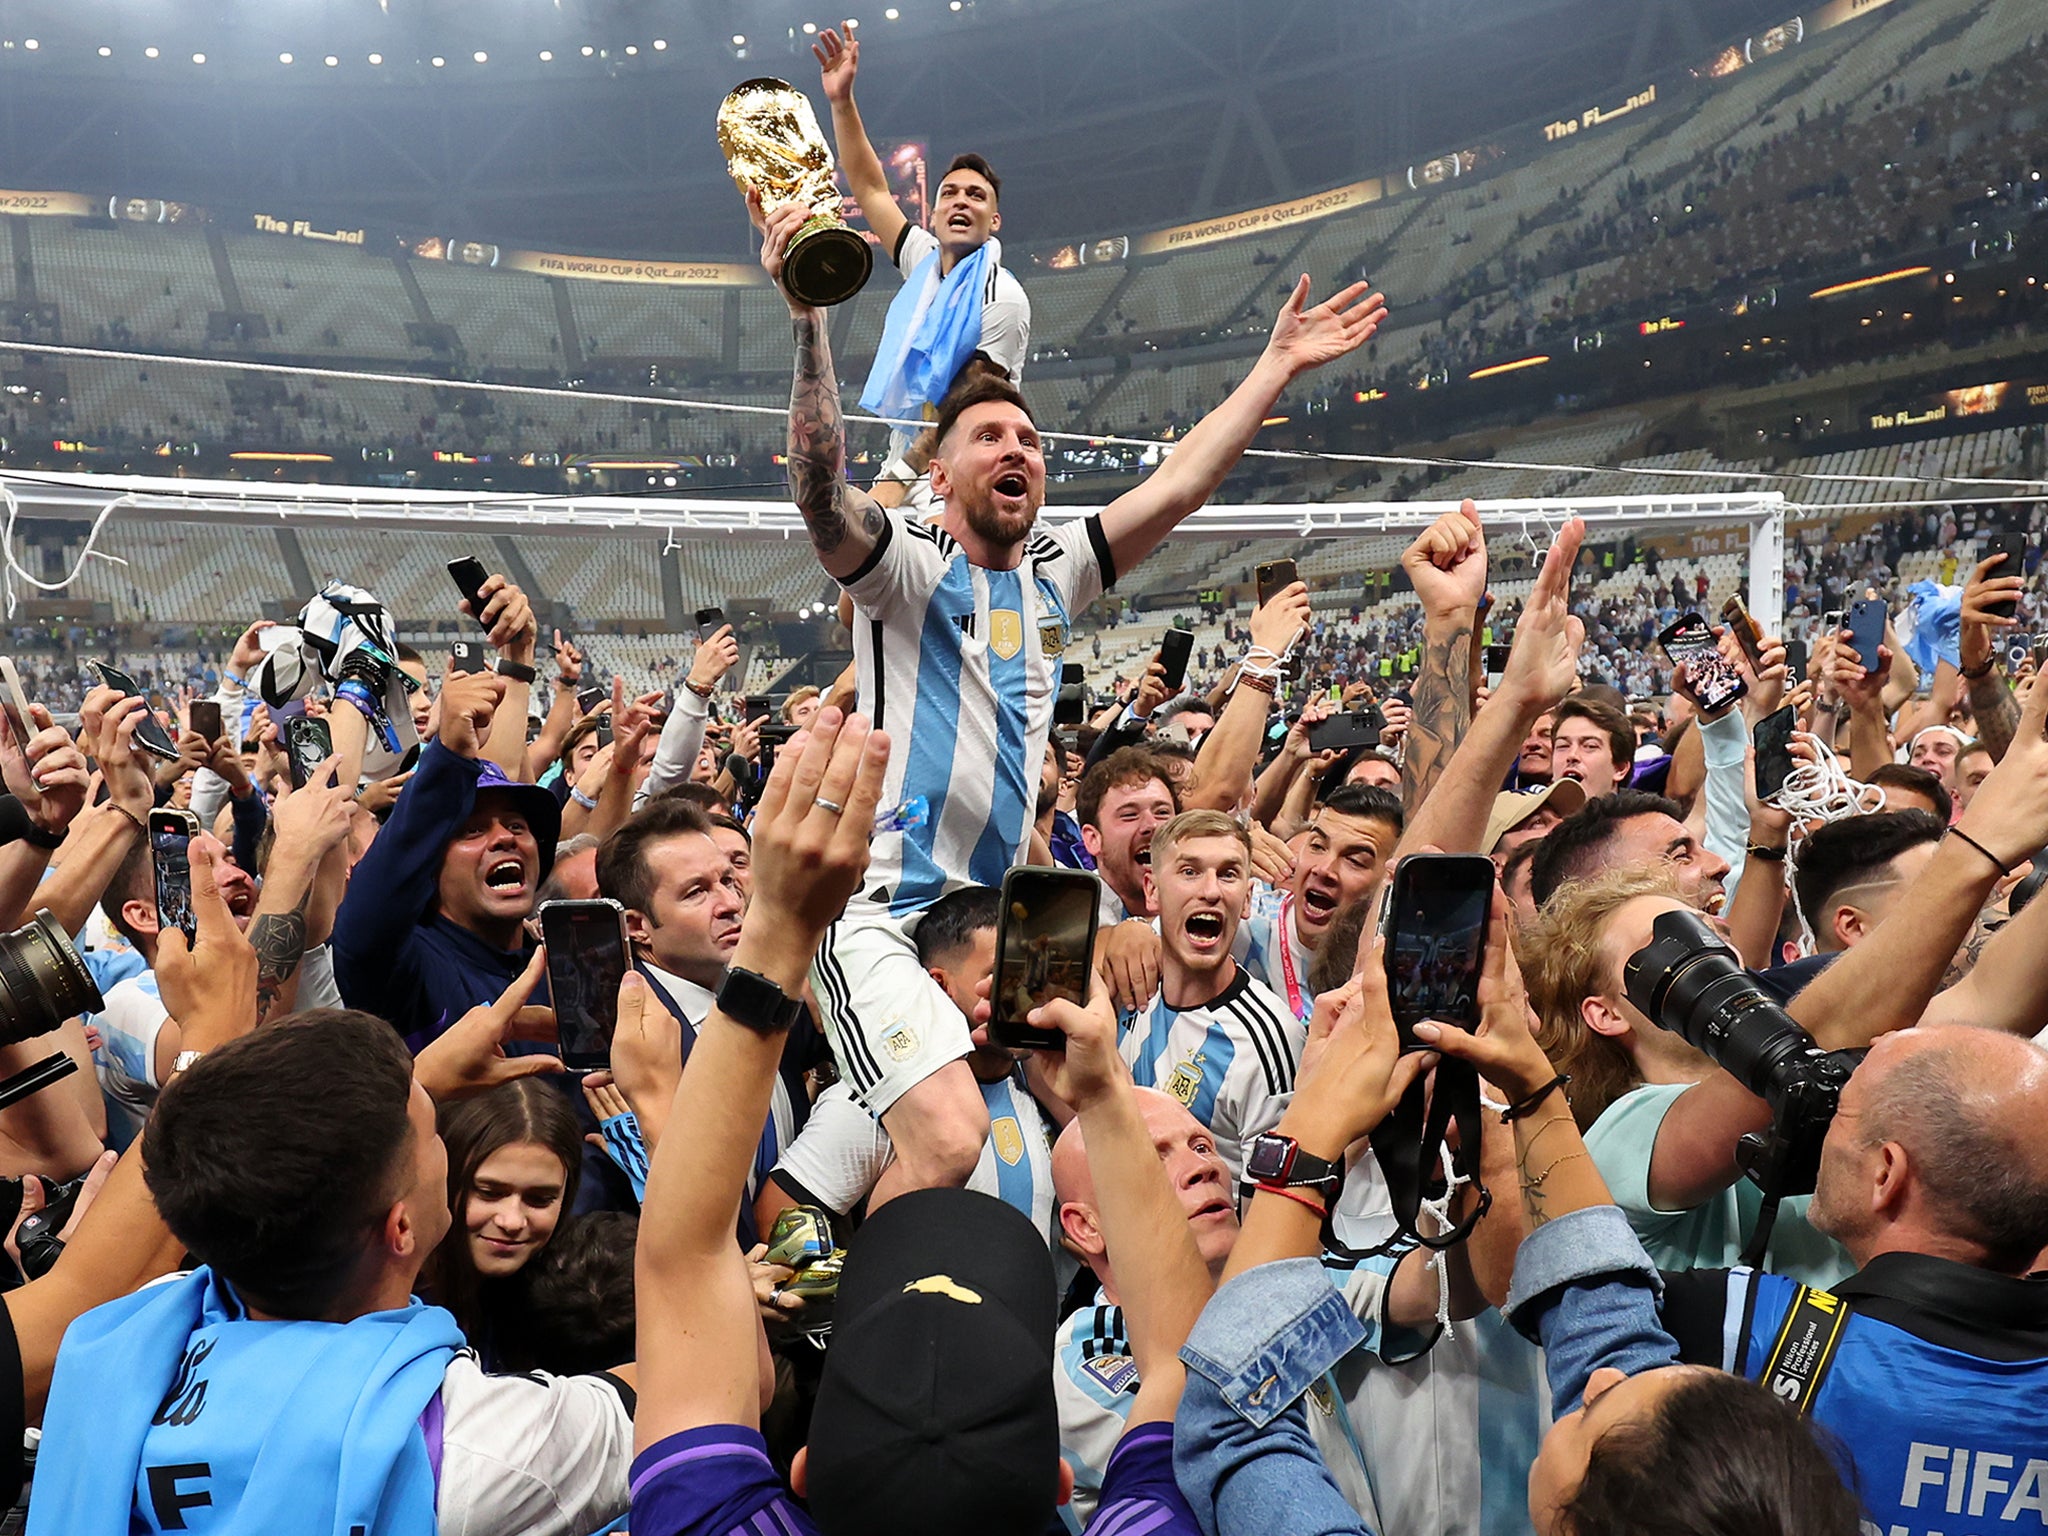 Lionel Messi raises the World Cup trophy into the air during Argentina’s celebrations